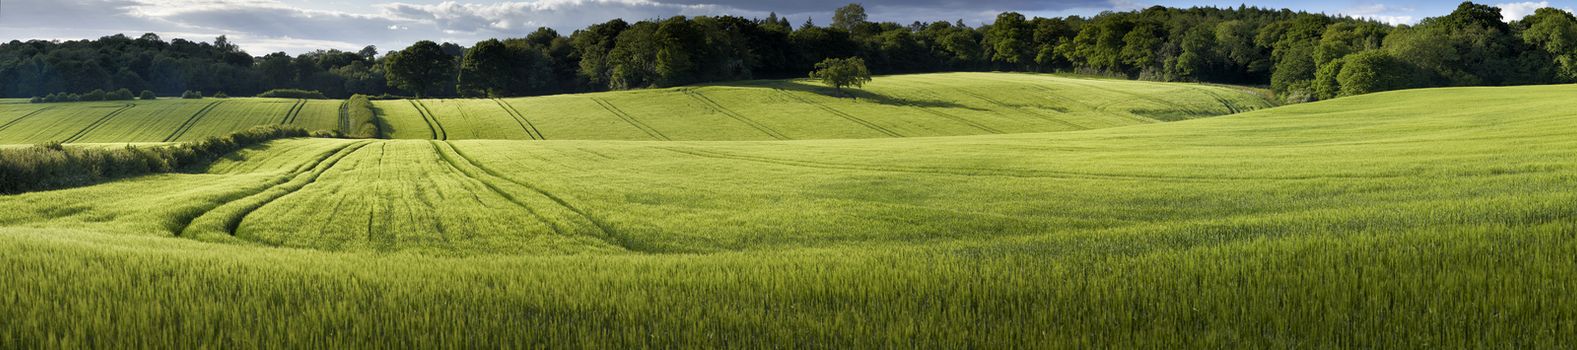 Panoramic view of green wheat growing in fields in The Chiltern Hills,England